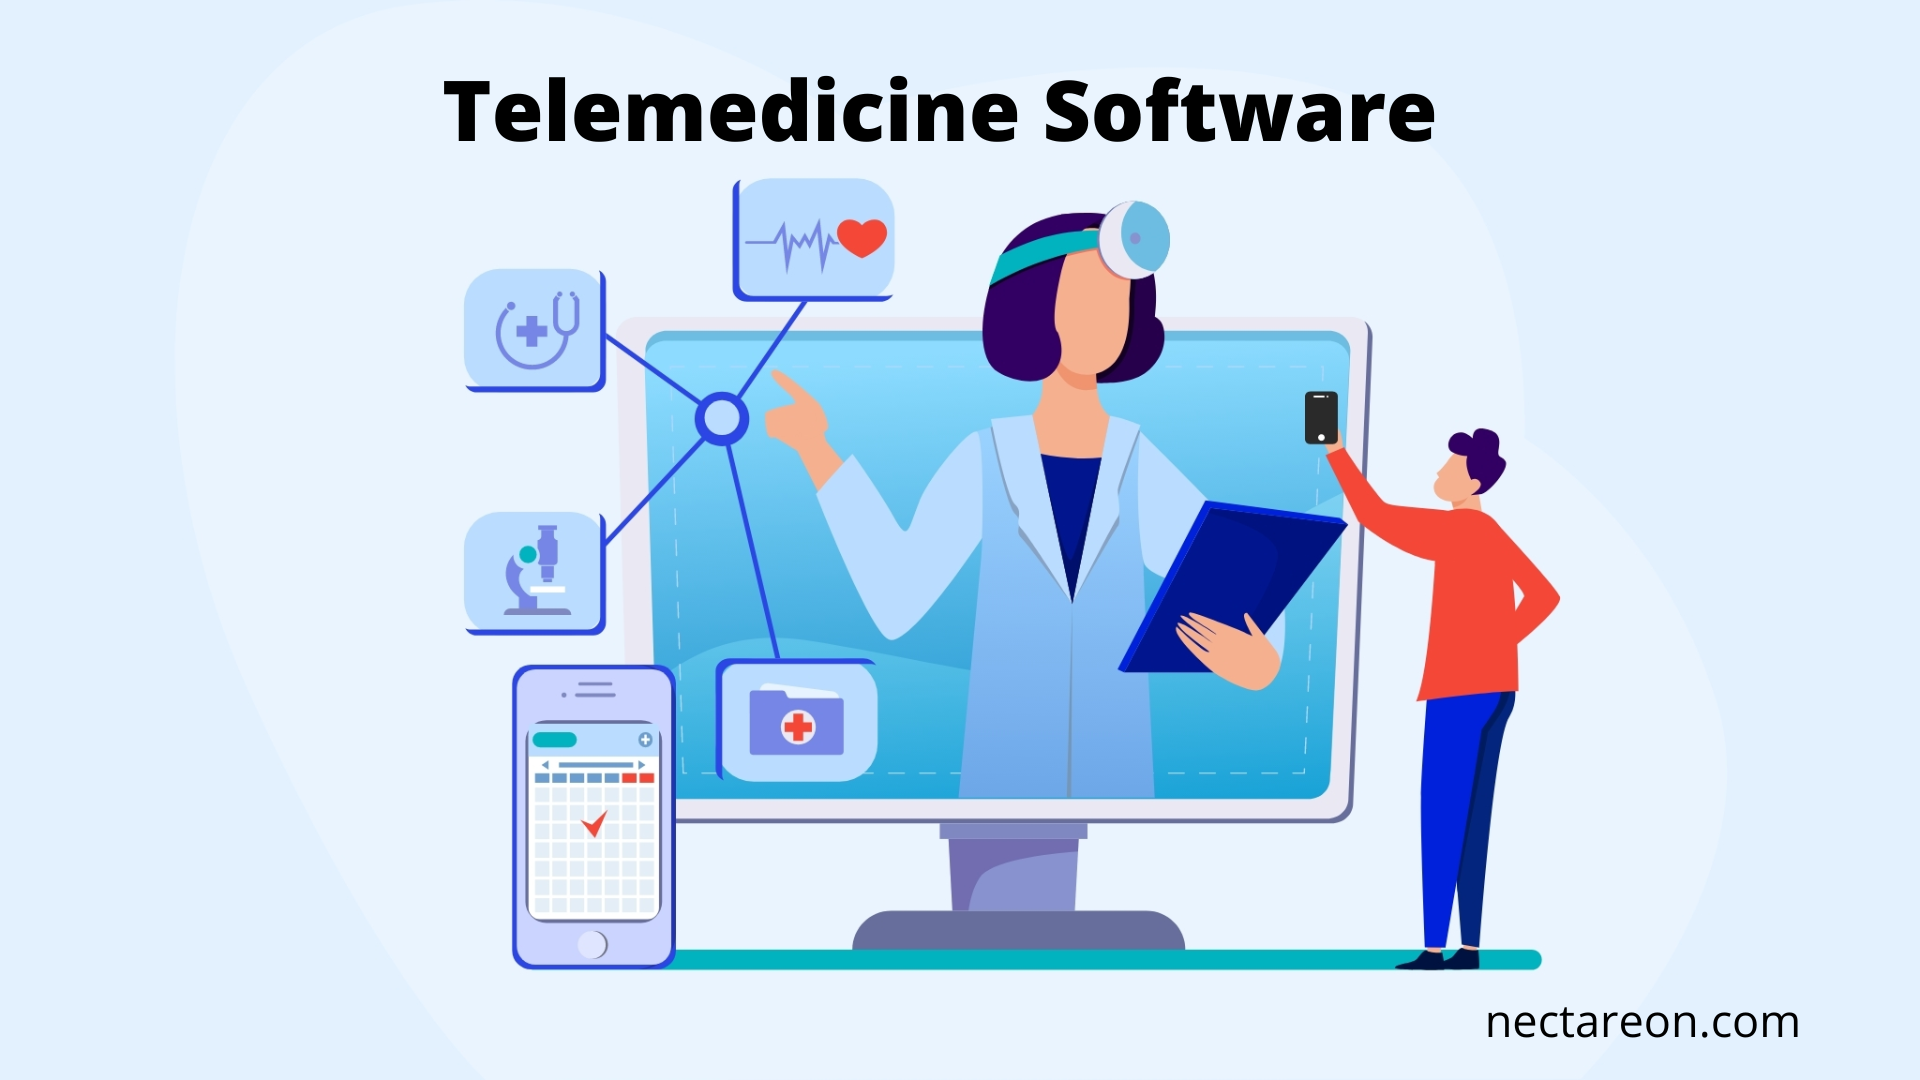 Types, Features and Benefits of Telemedicine Software